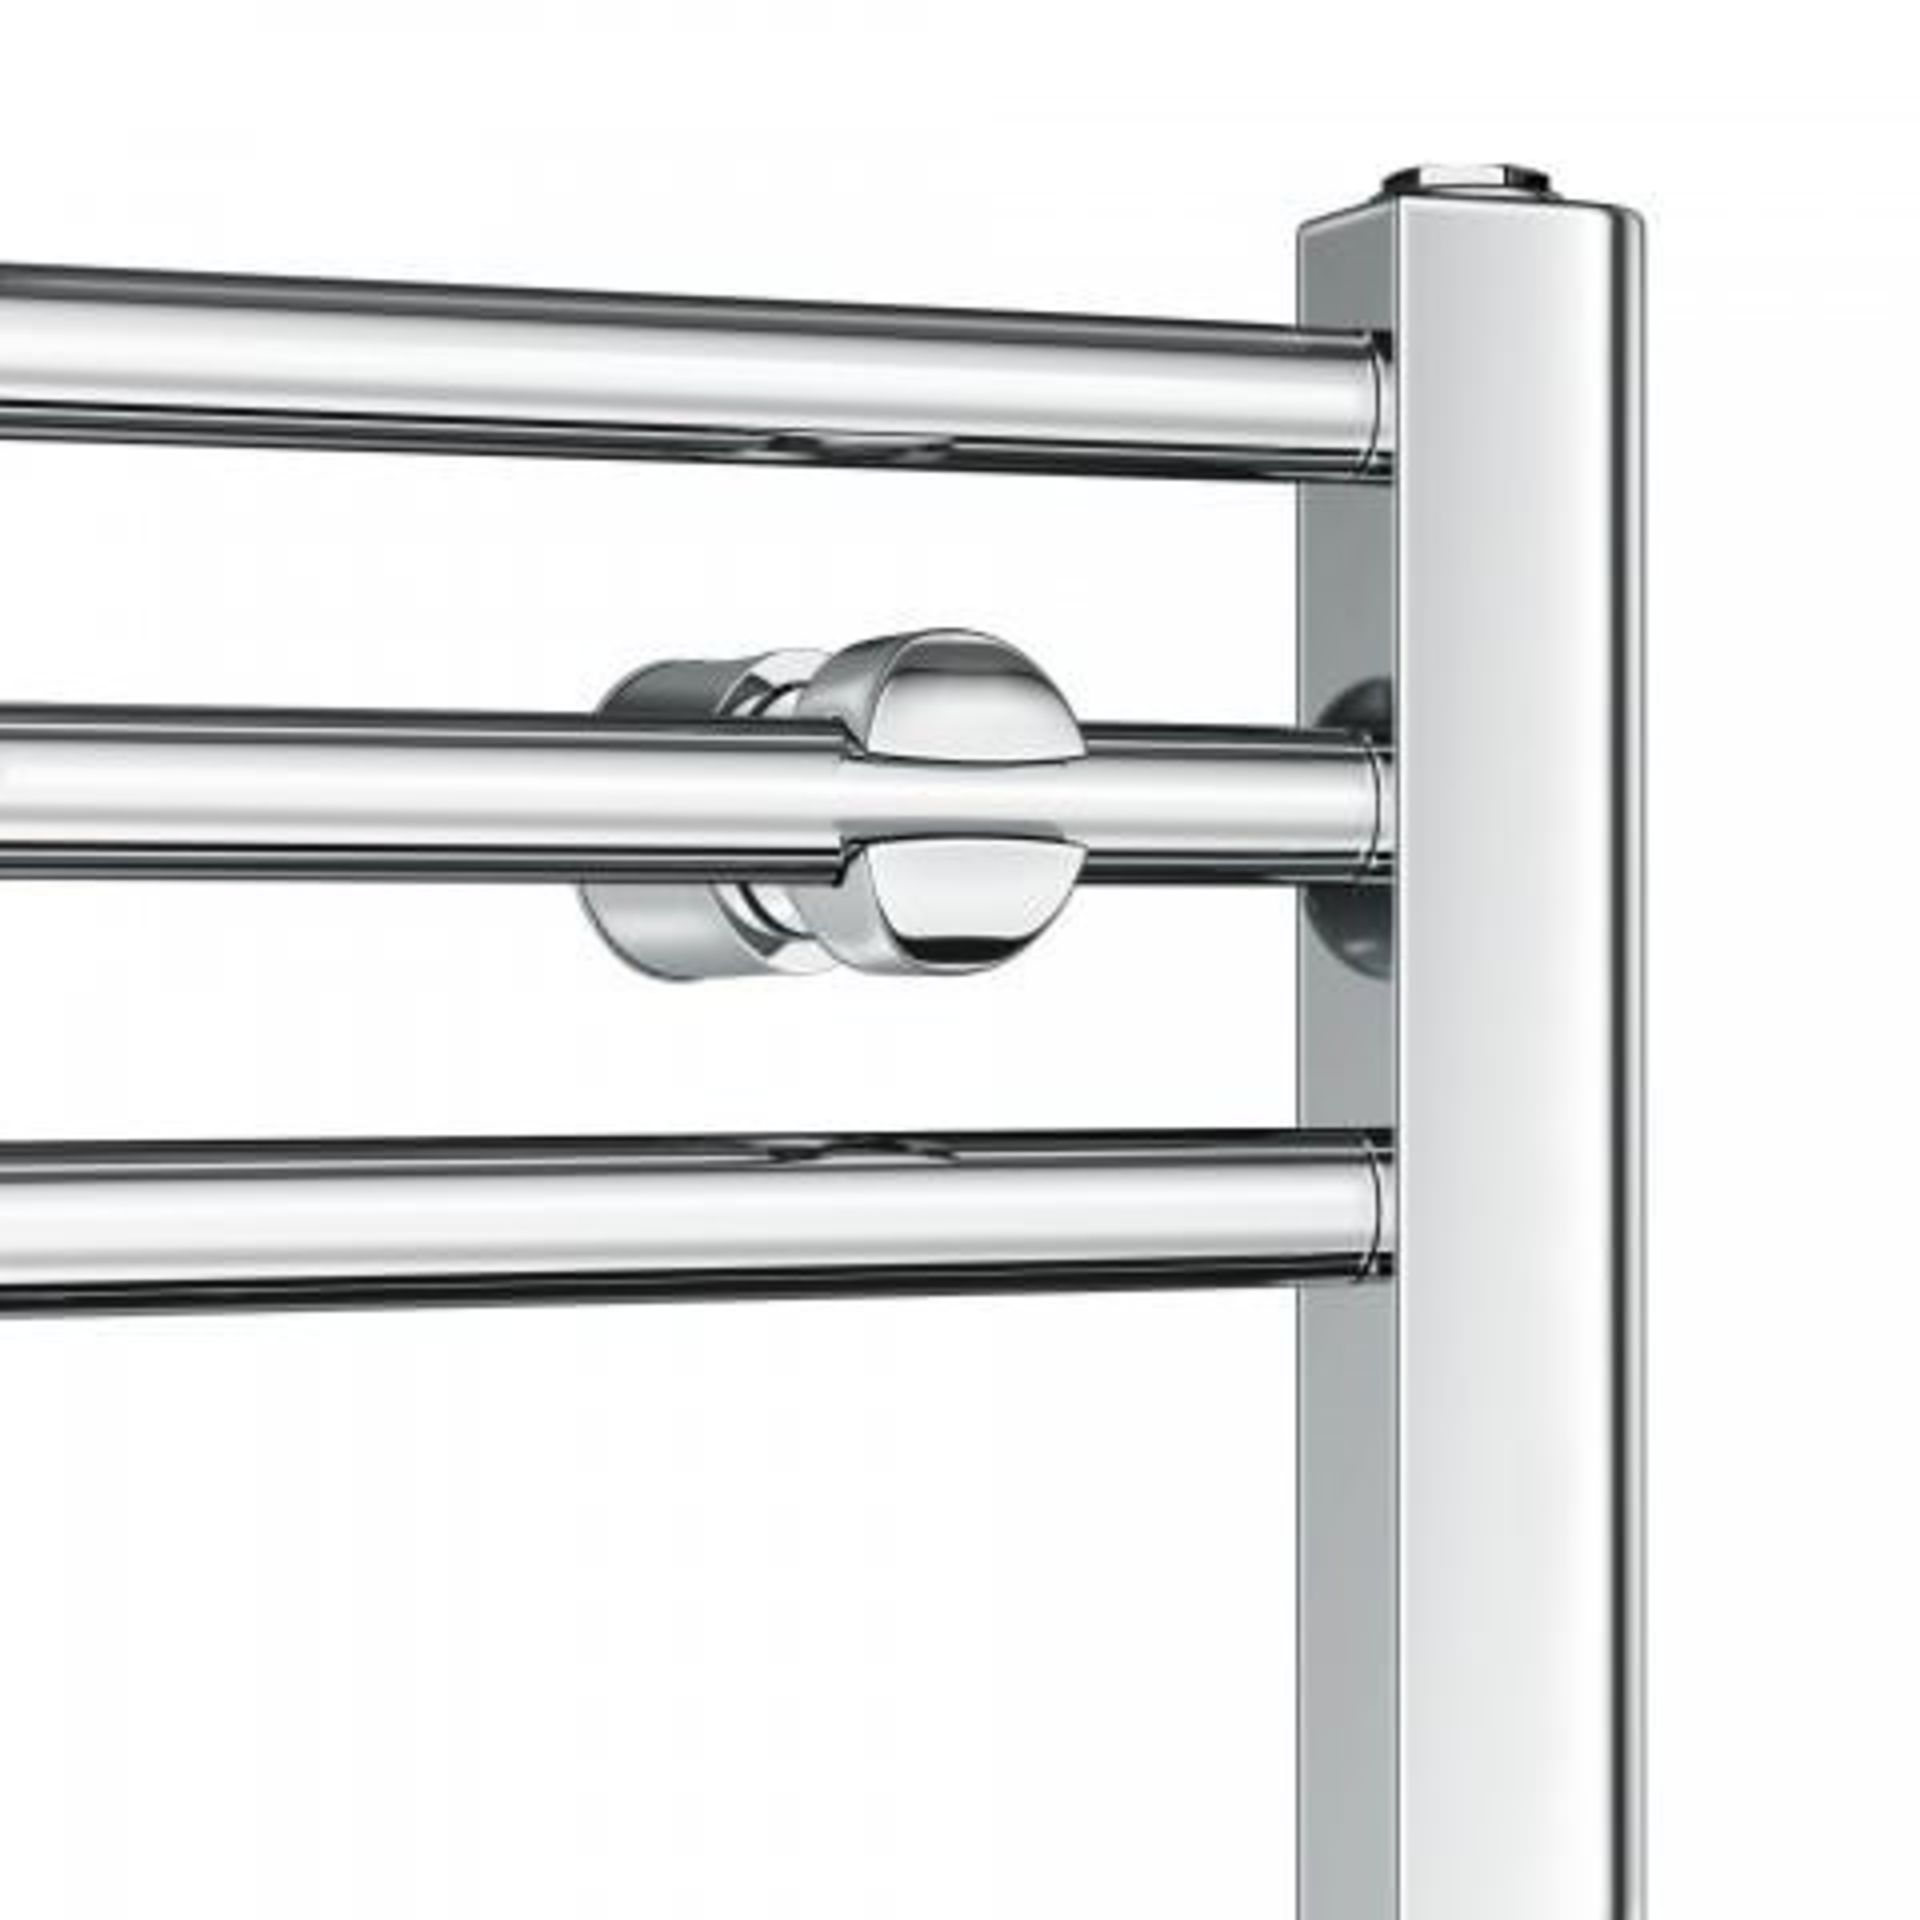 5 BRAND NEW BOXED 1200x600mm - 20mm Tubes - Chrome Heated Straight Rail Ladder Towel Radiator.RRP £ - Image 4 of 4